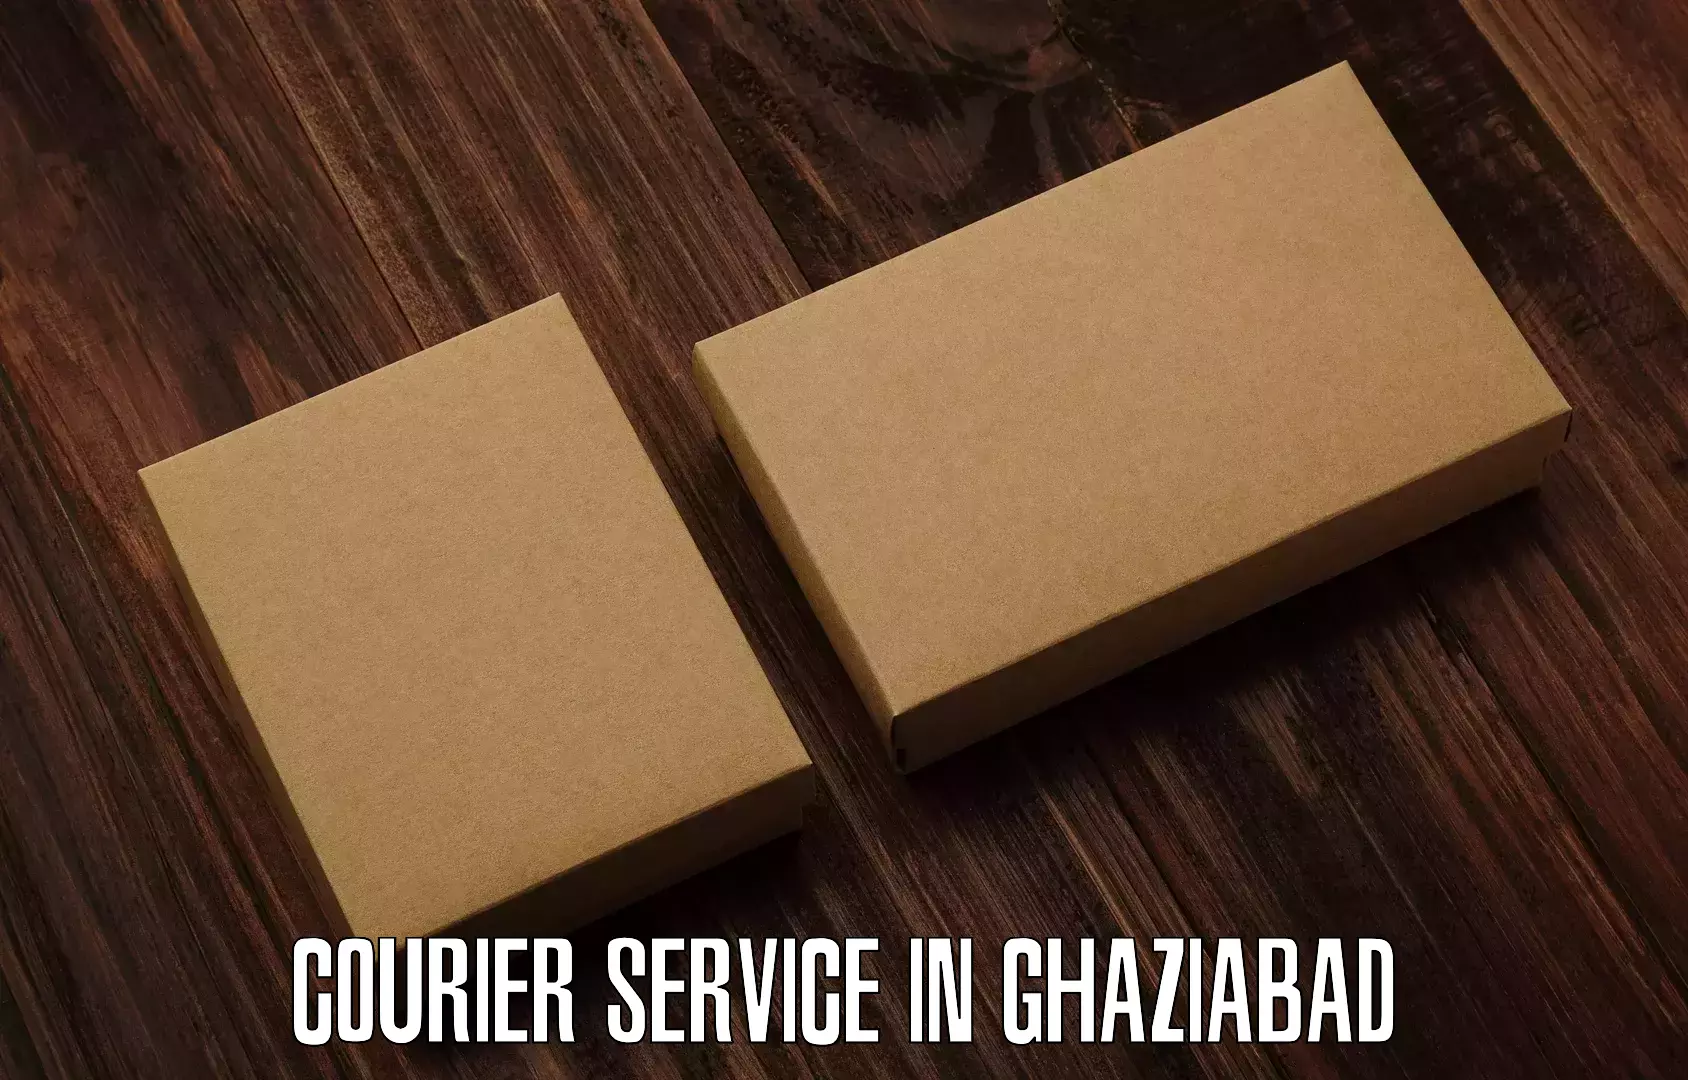 Courier service partnerships in Ghaziabad